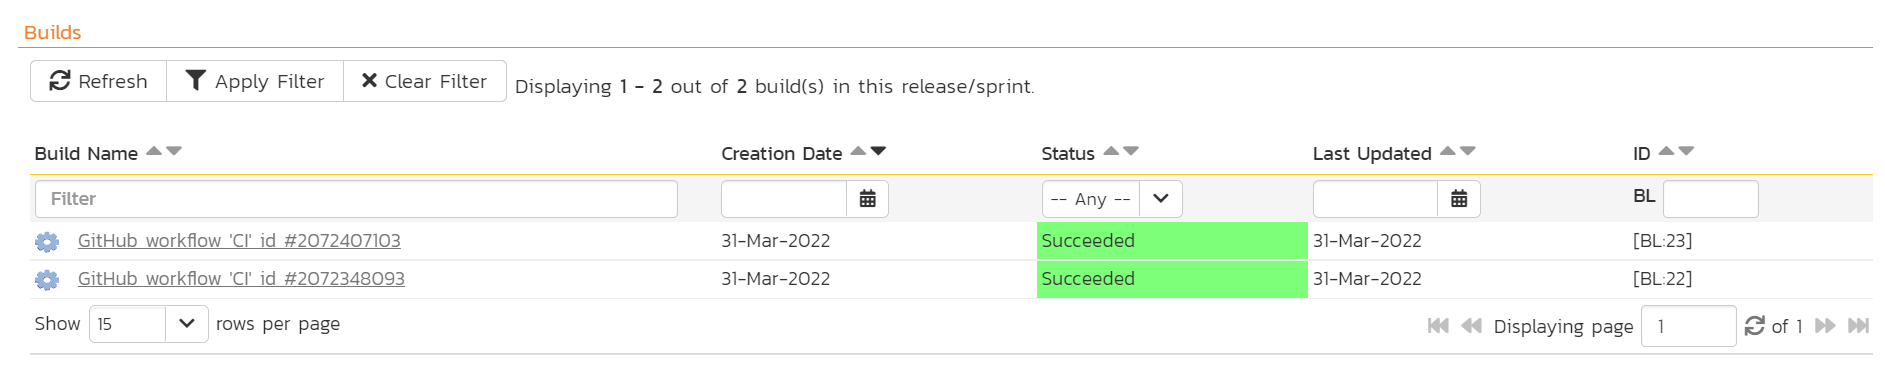 Build list on the release details page